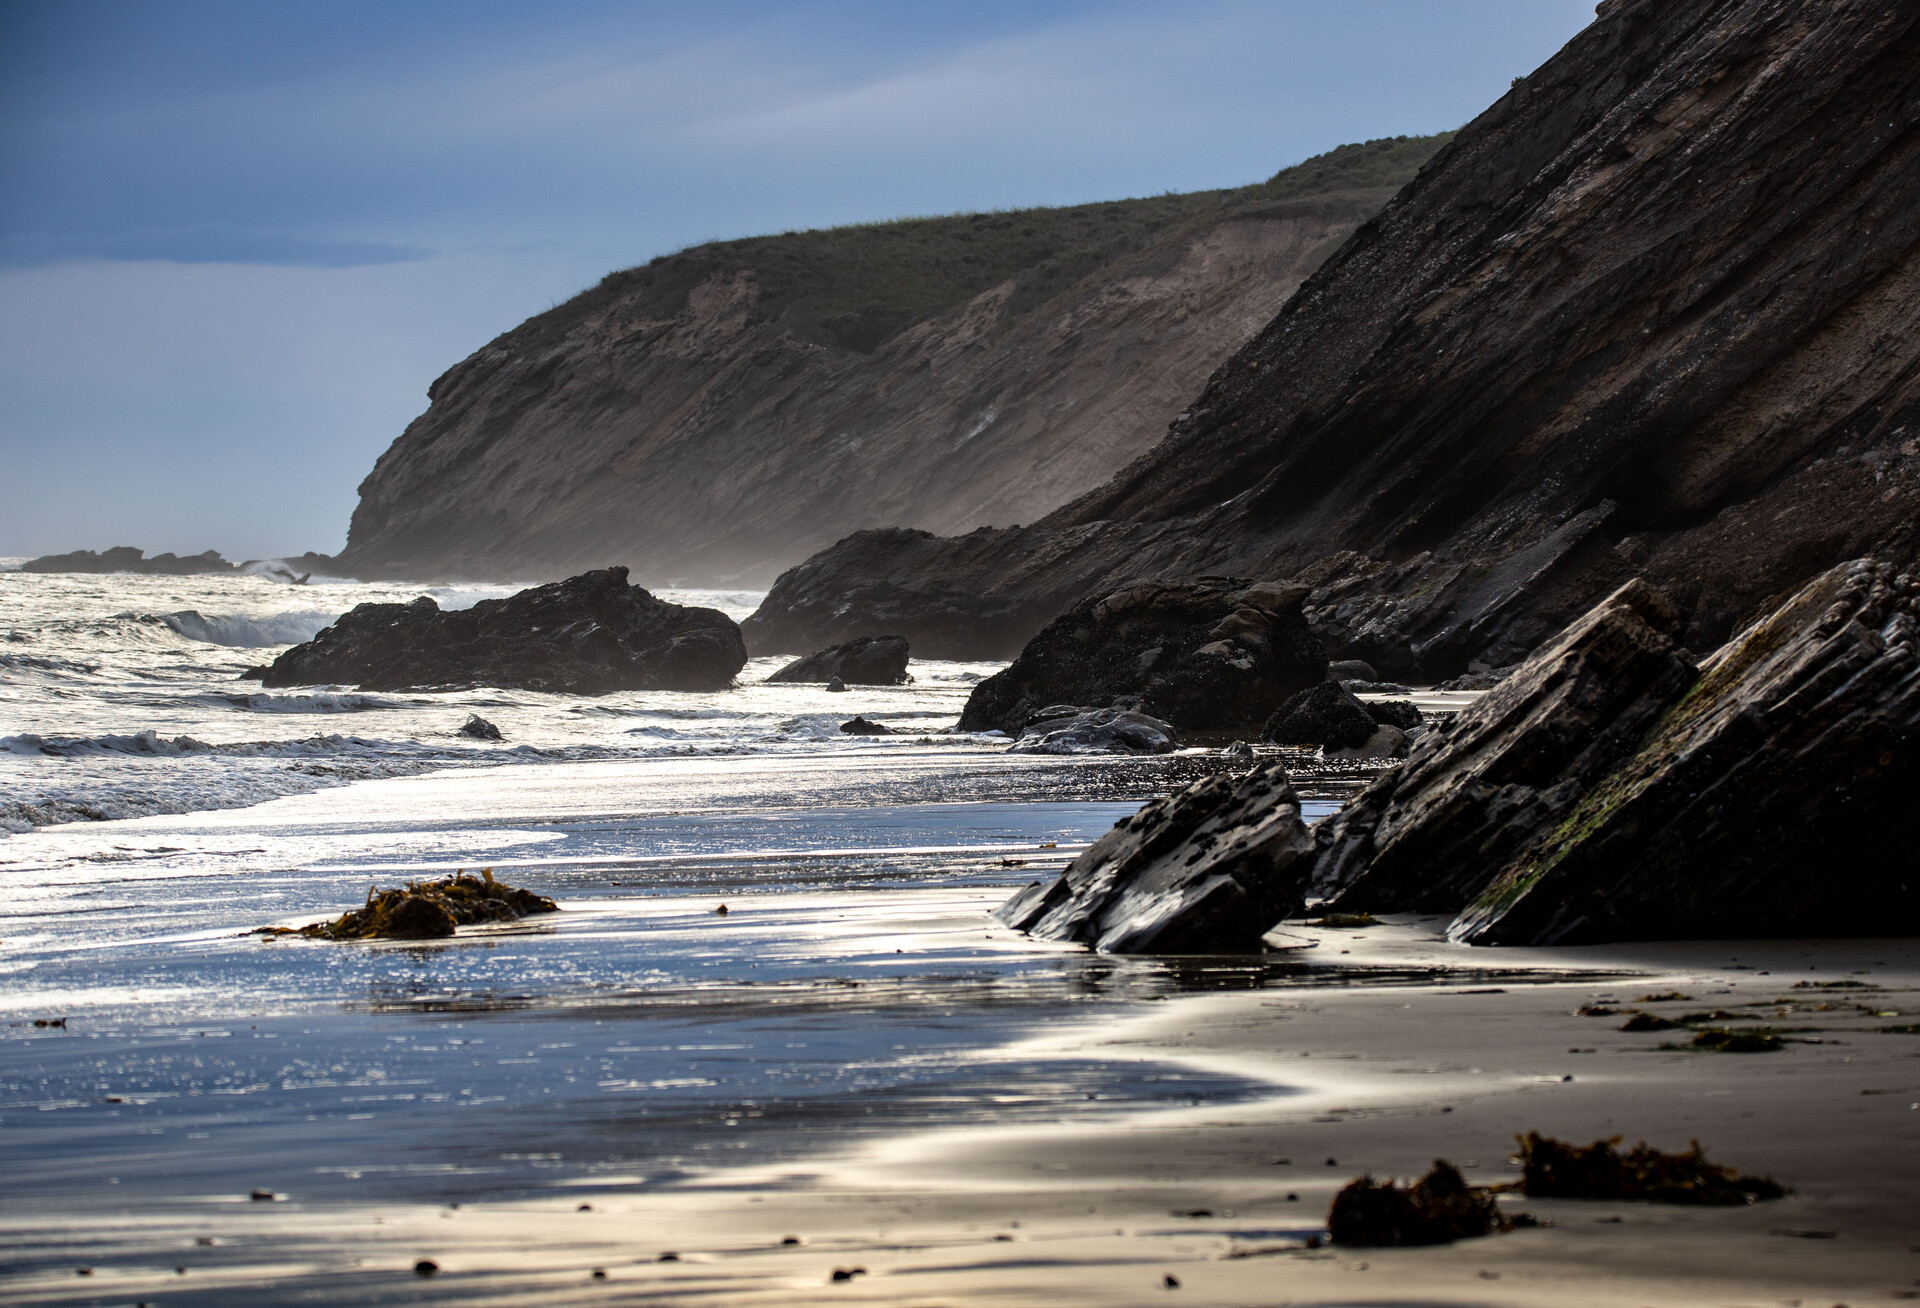 A view up a sandy shoreline alongside steep, shaded, rocky cliffs, with the sun shining on receding waves.